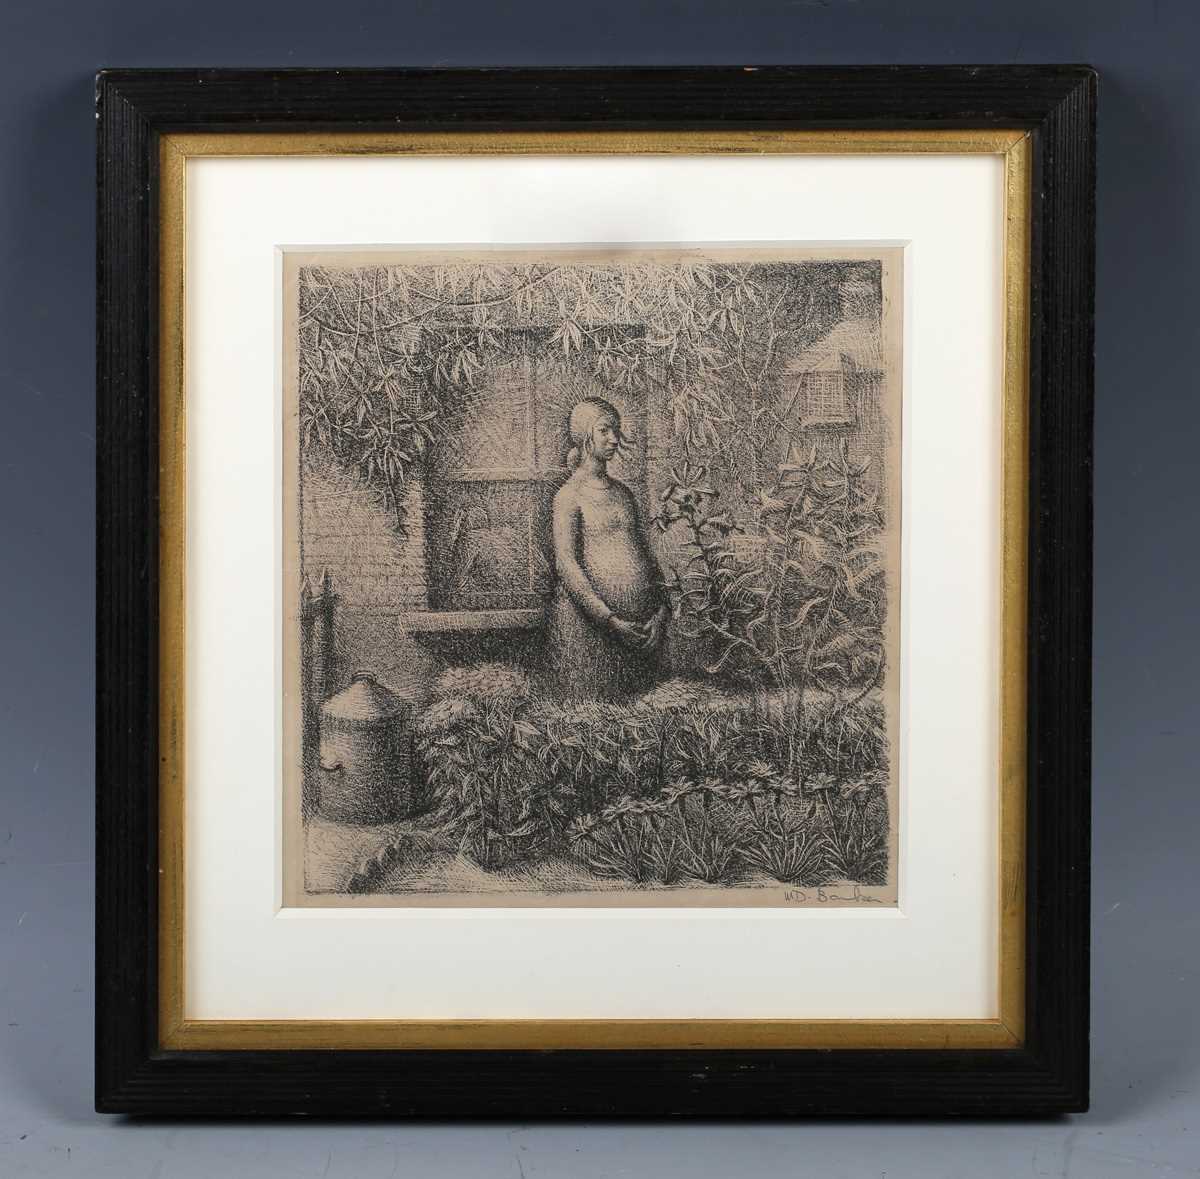 Margaret Dorothy Barker – ‘Woman in Garden’, early 20th century lithograph, signed in pencil - Image 2 of 9